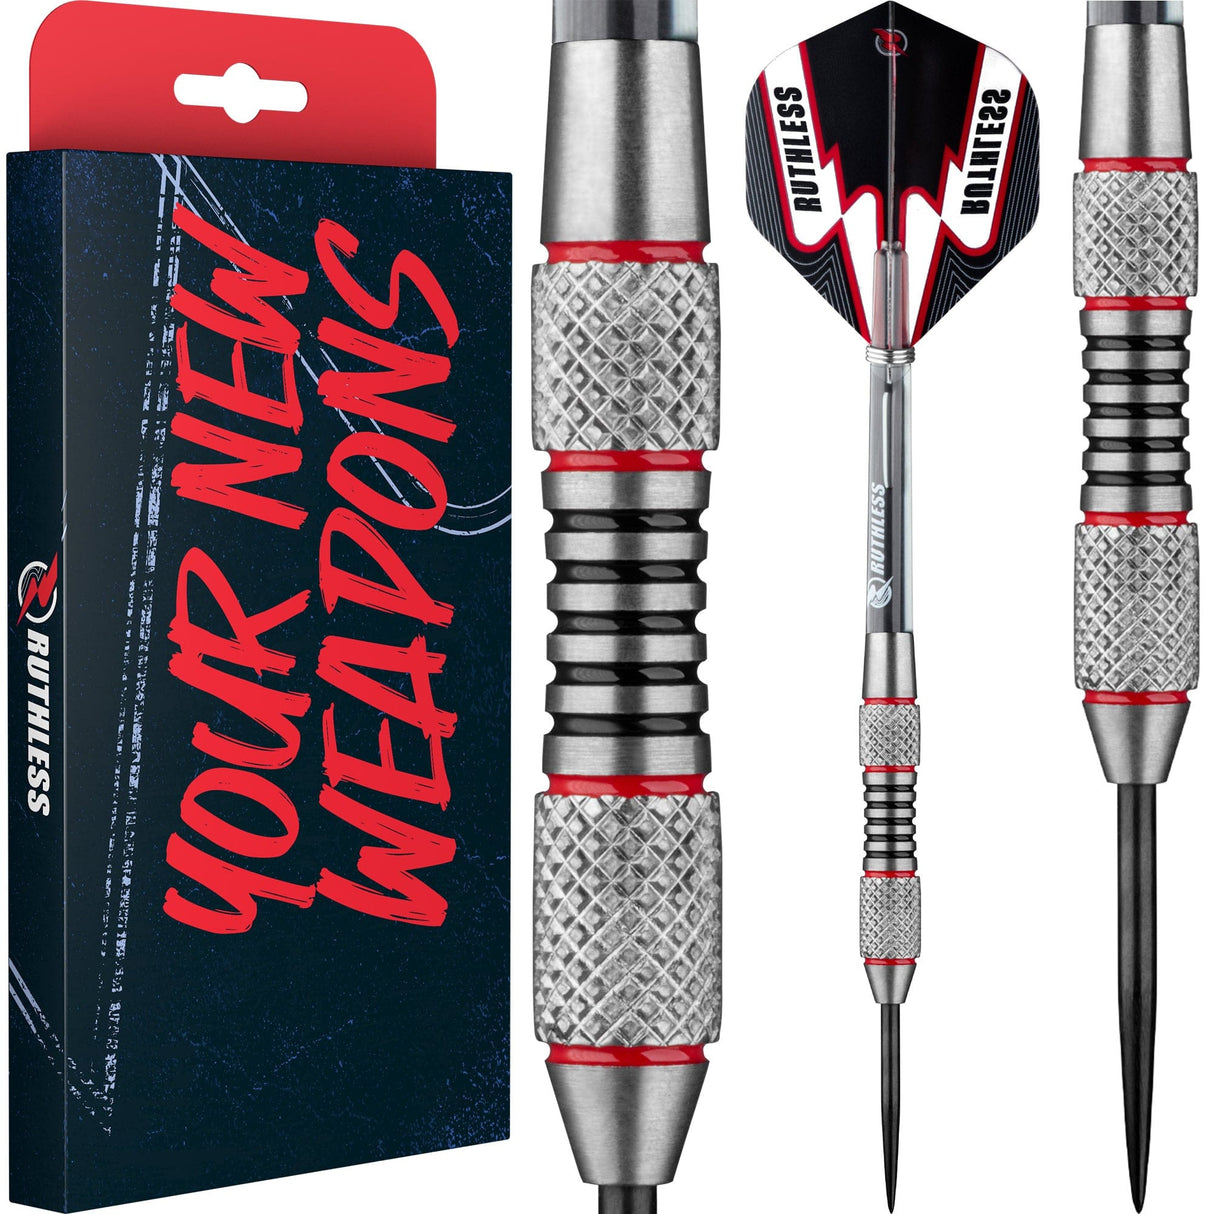 Ruthless Scallop Darts - Steel Tip - Twin Knurl - Black & Red - 21g 21g